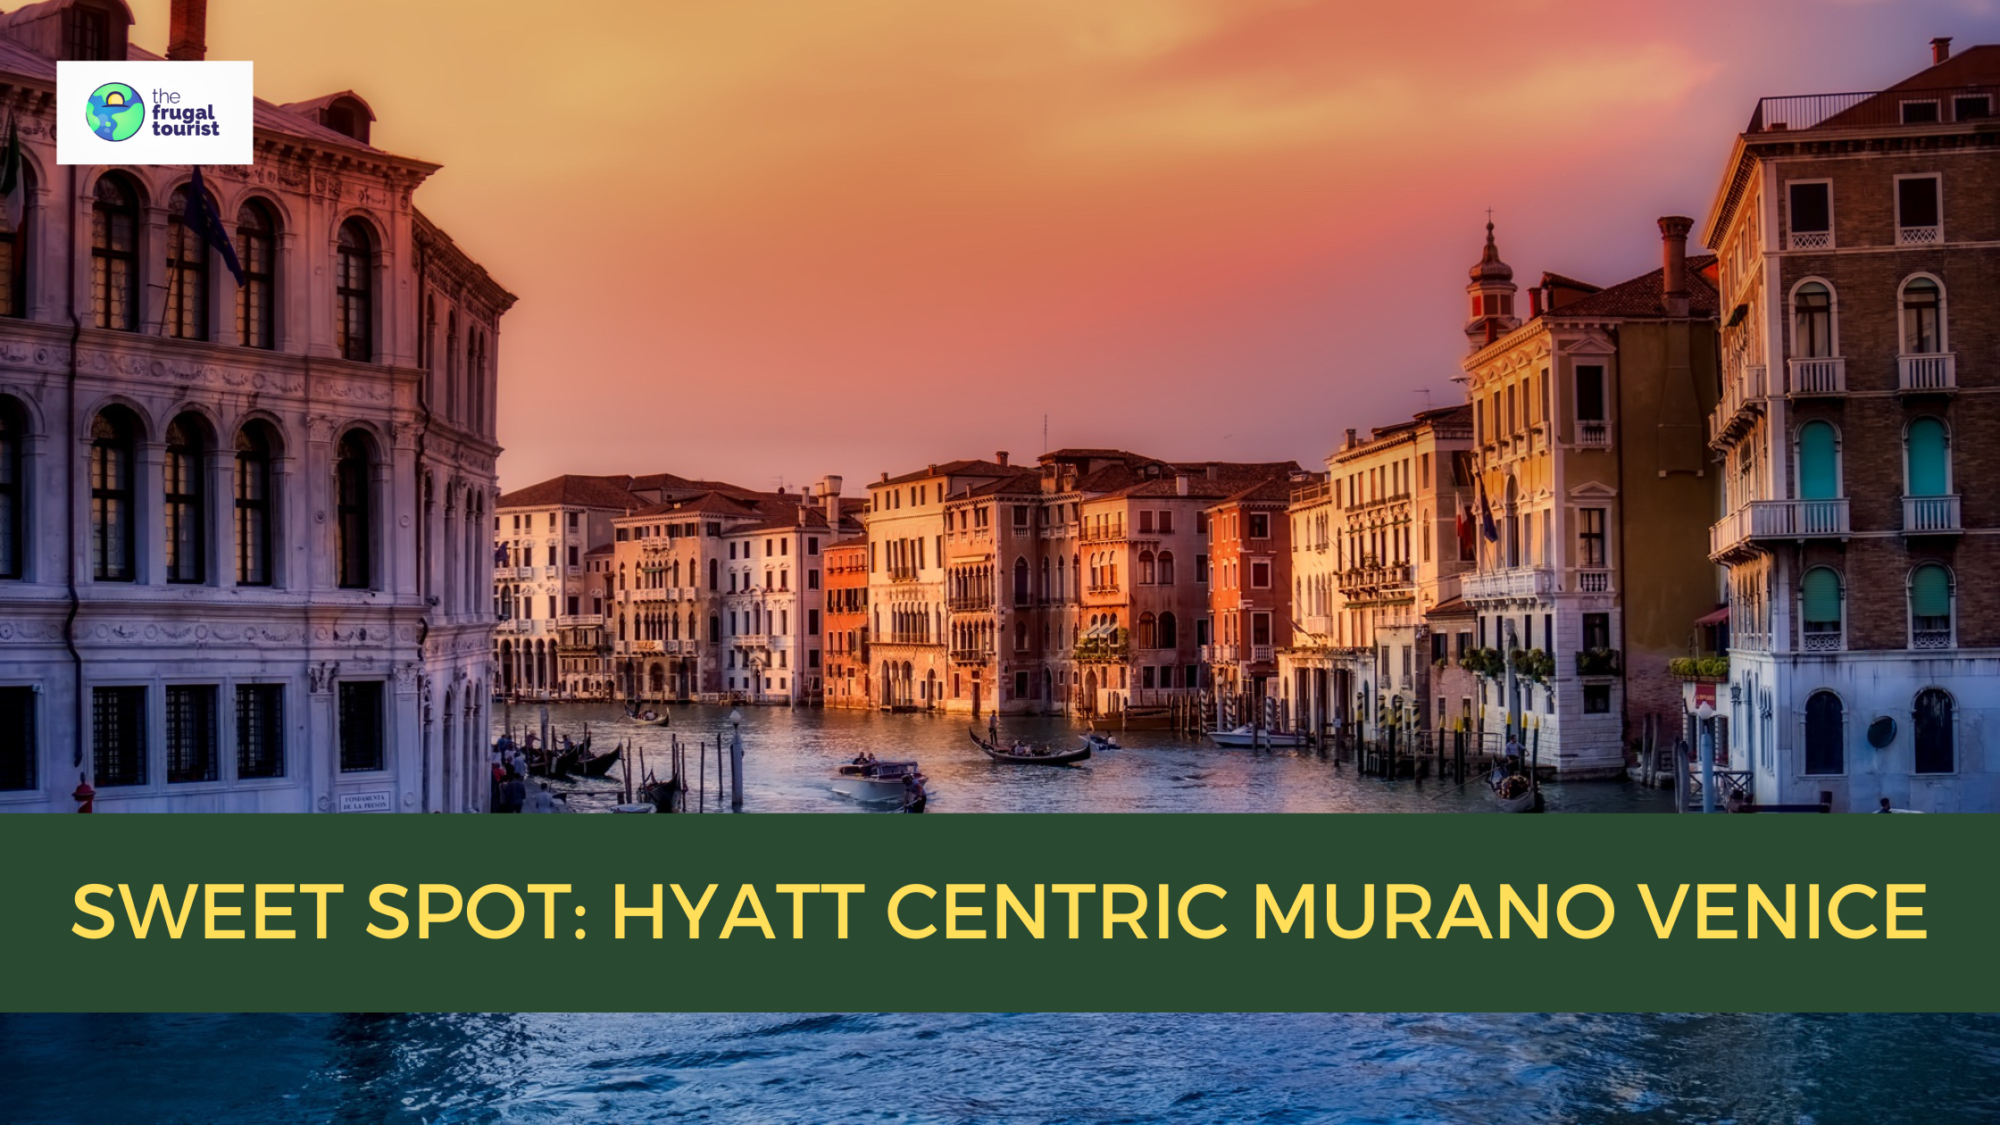 Hyatt Centric Murano Venice: An Excellent Redemption on Points